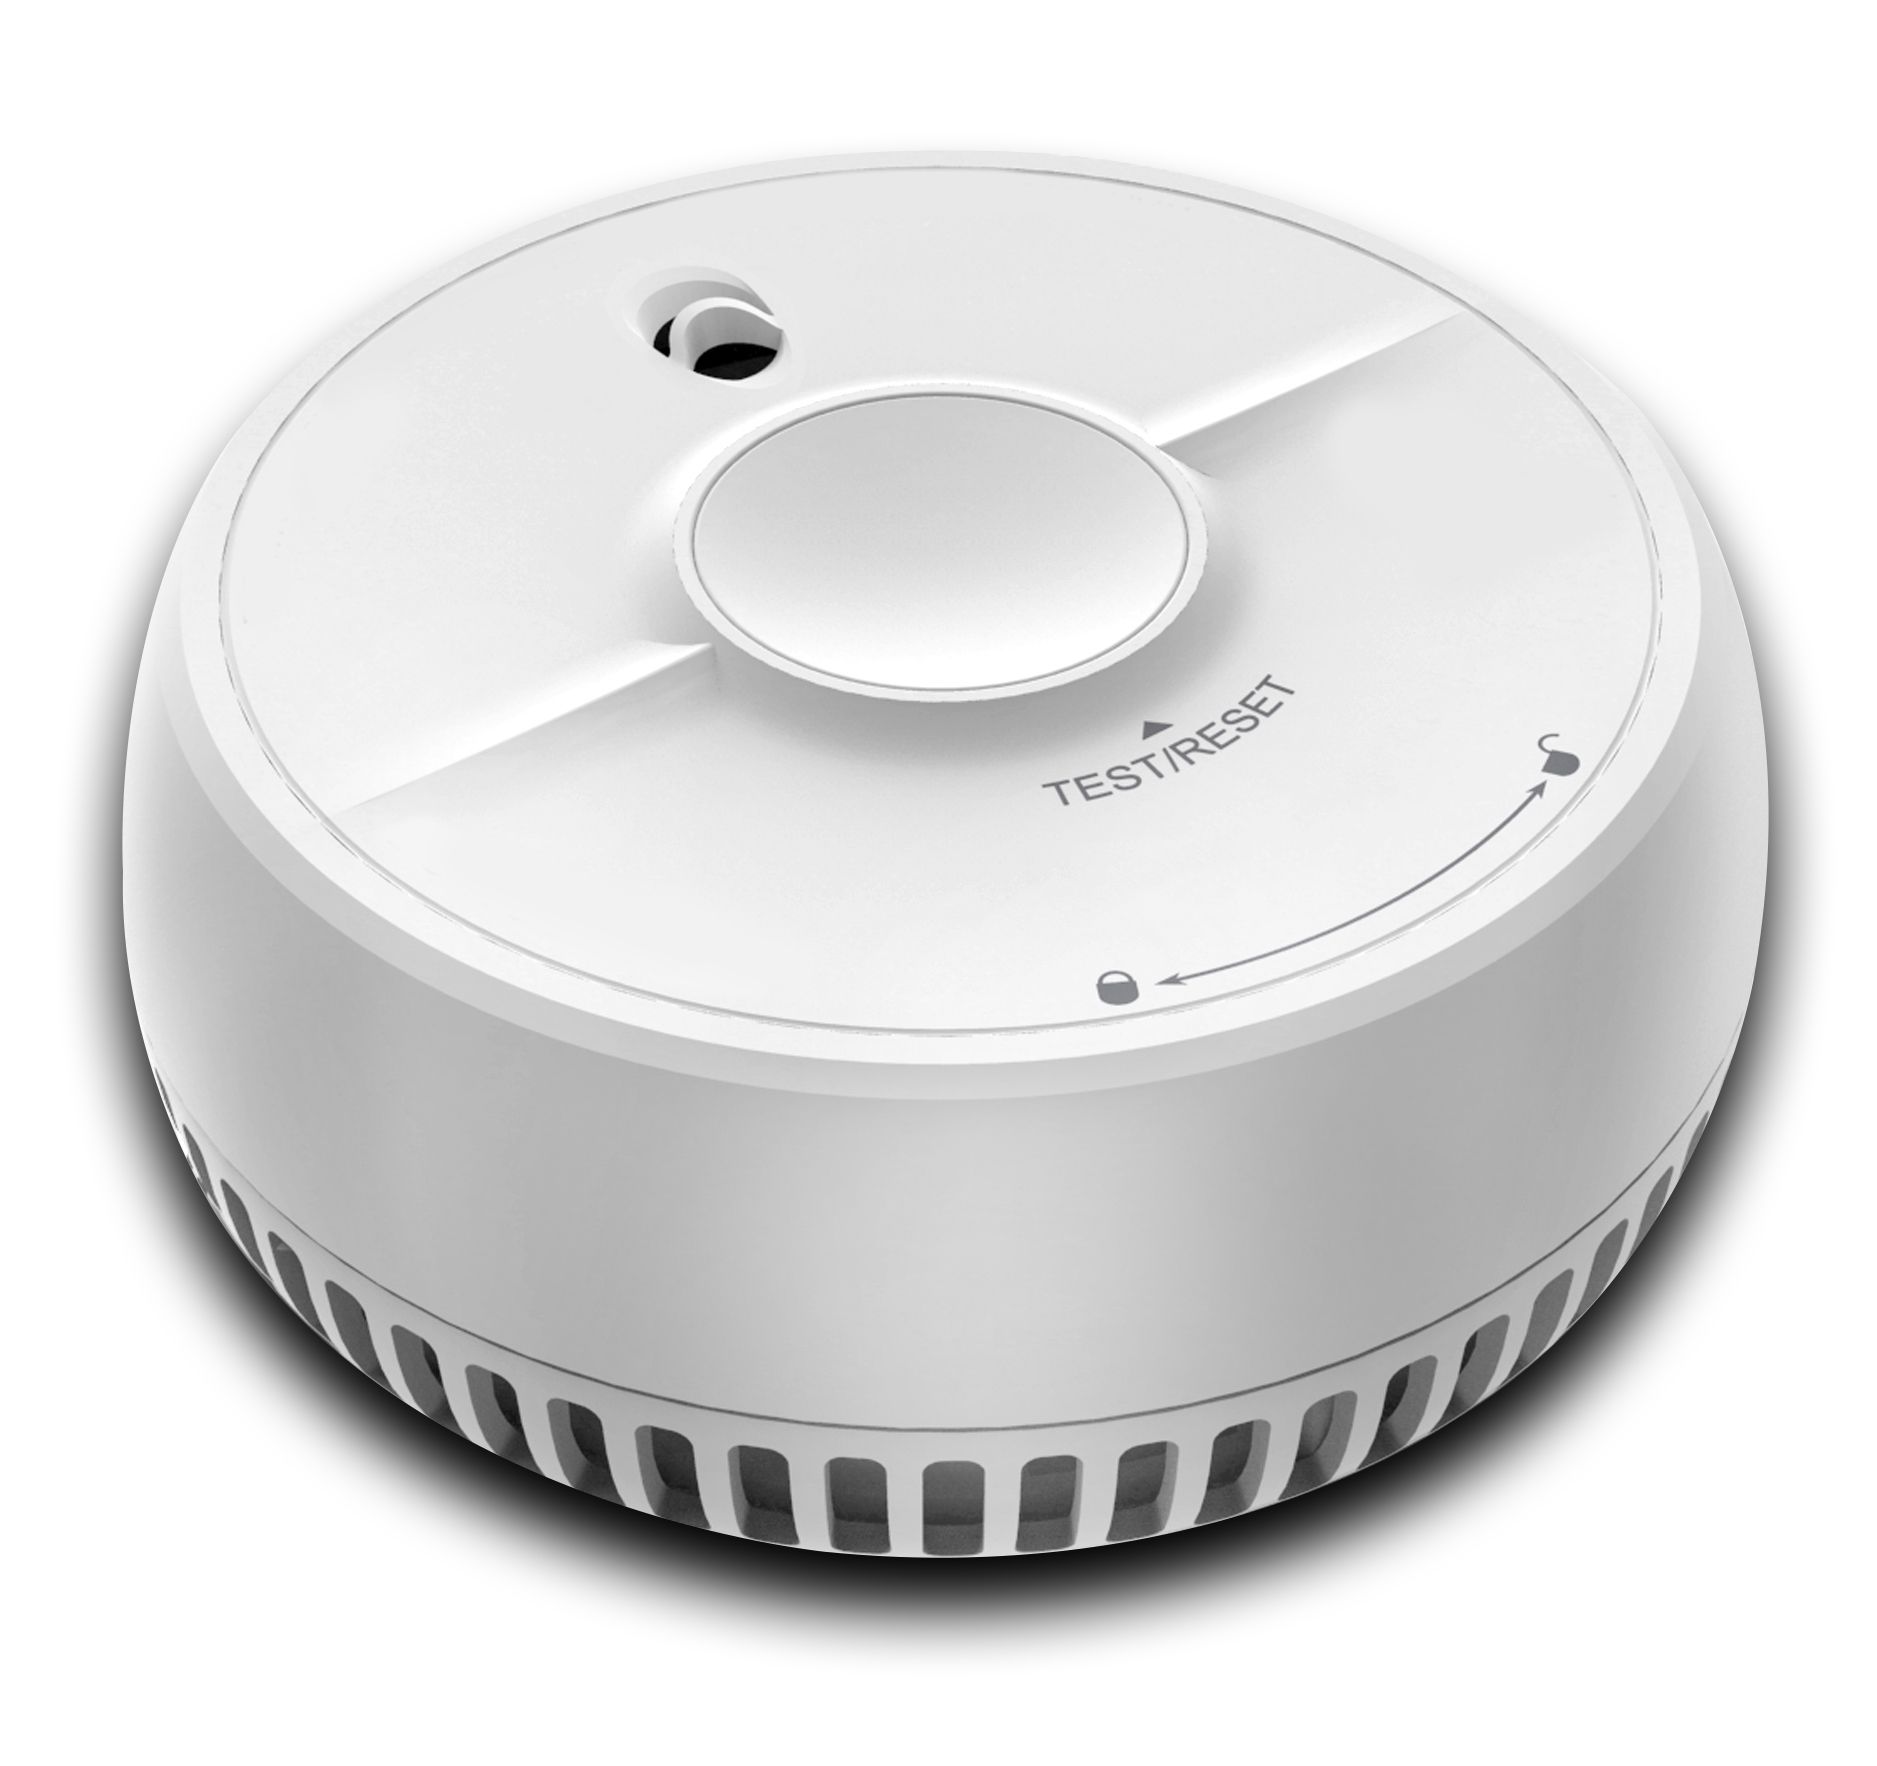 FireAngel Toast Proof SB1-R Standalone Optical Smoke Alarm with 1-year battery